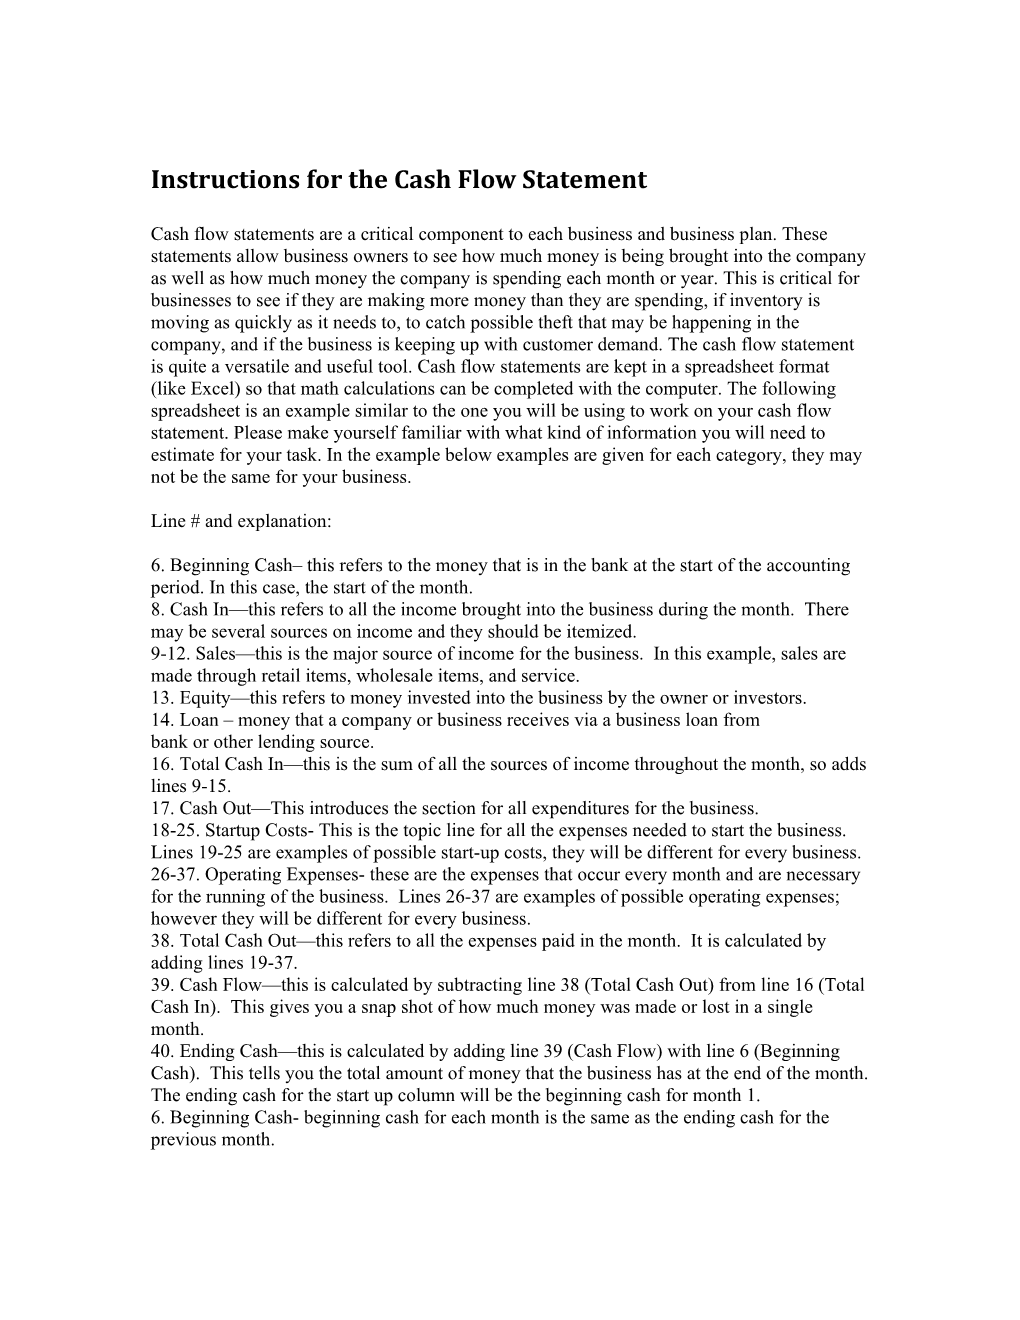 Instructions for the Cash Flow Statement